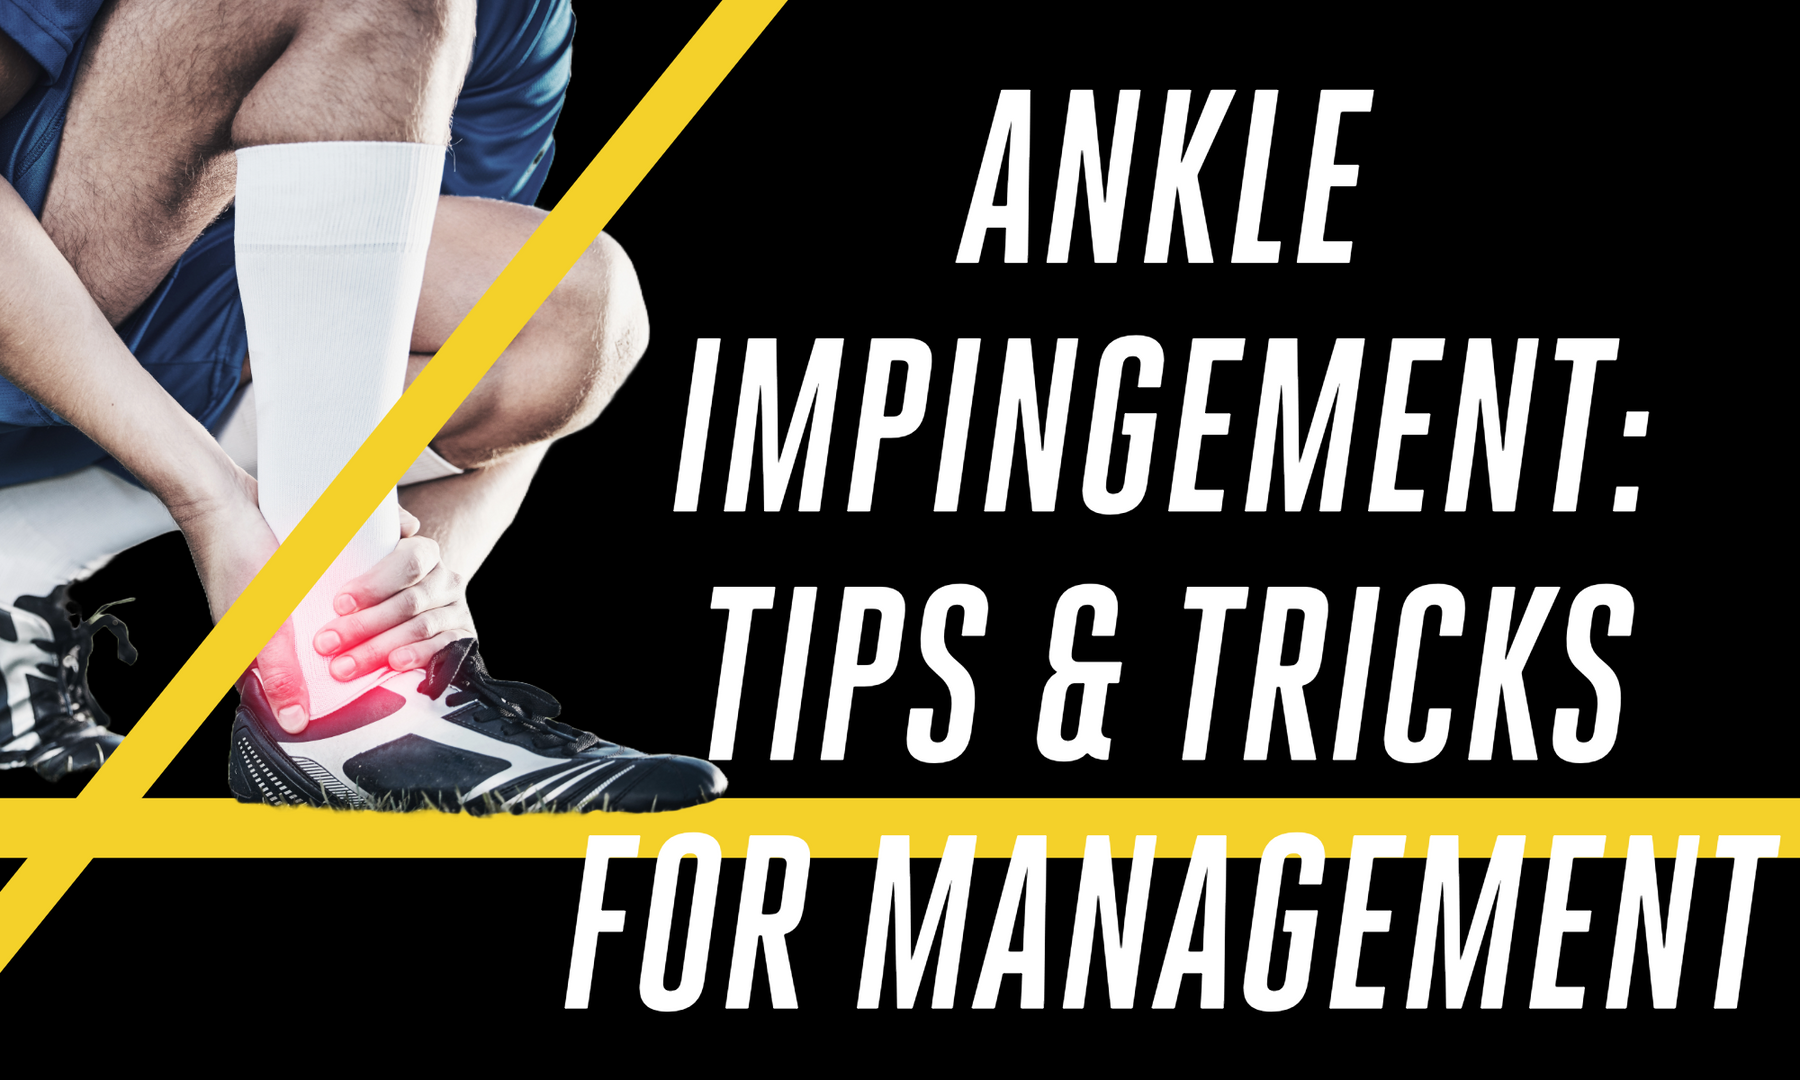 Ankle Impingement: Tips Tricks and Management